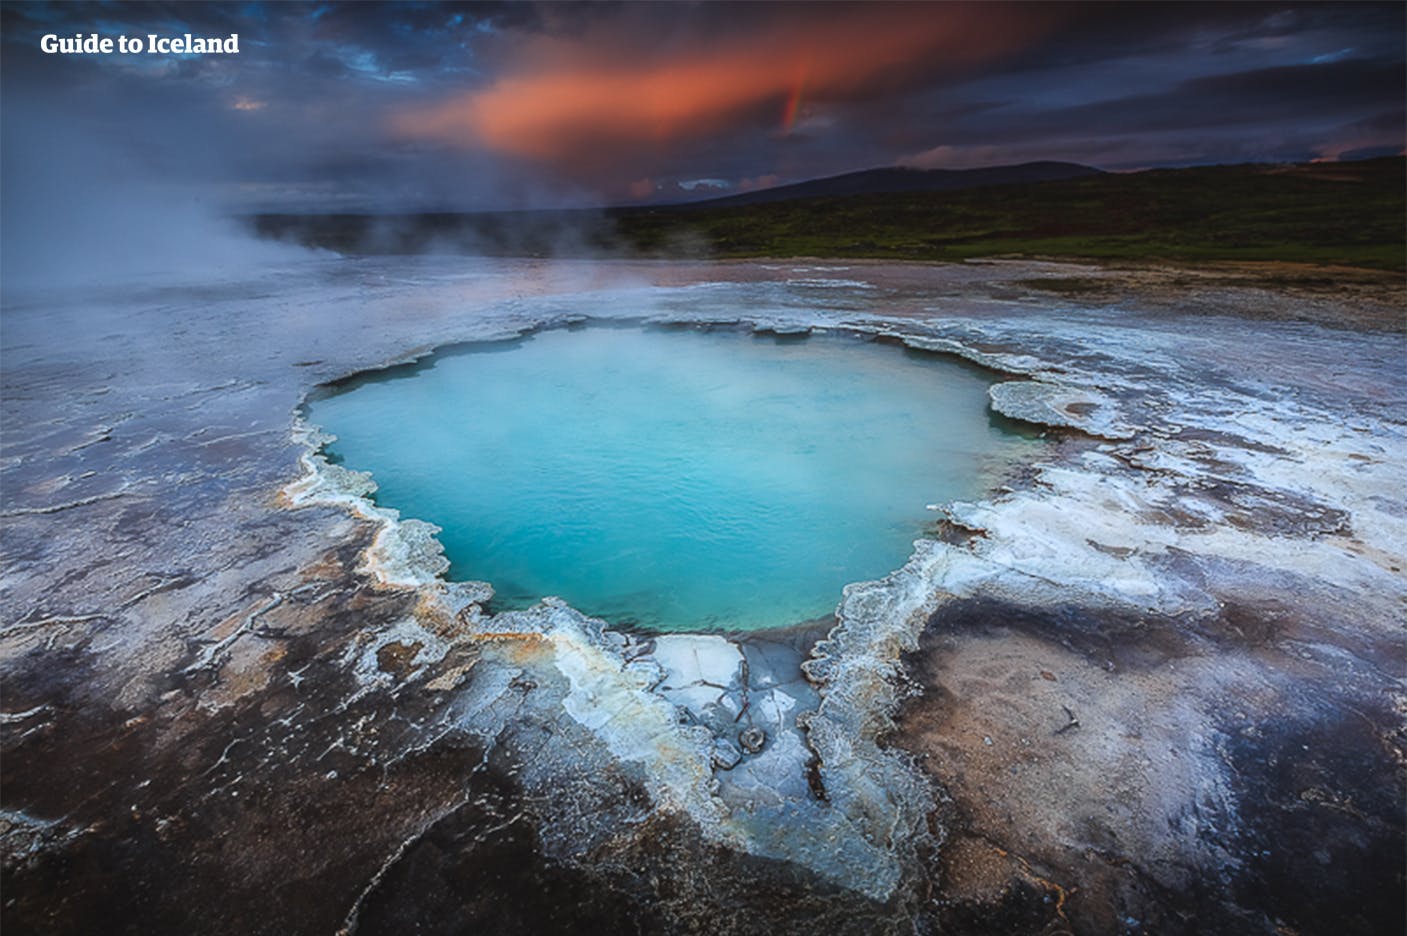 A steaming hot spring found in a geothermal area near Lake Mývatn.